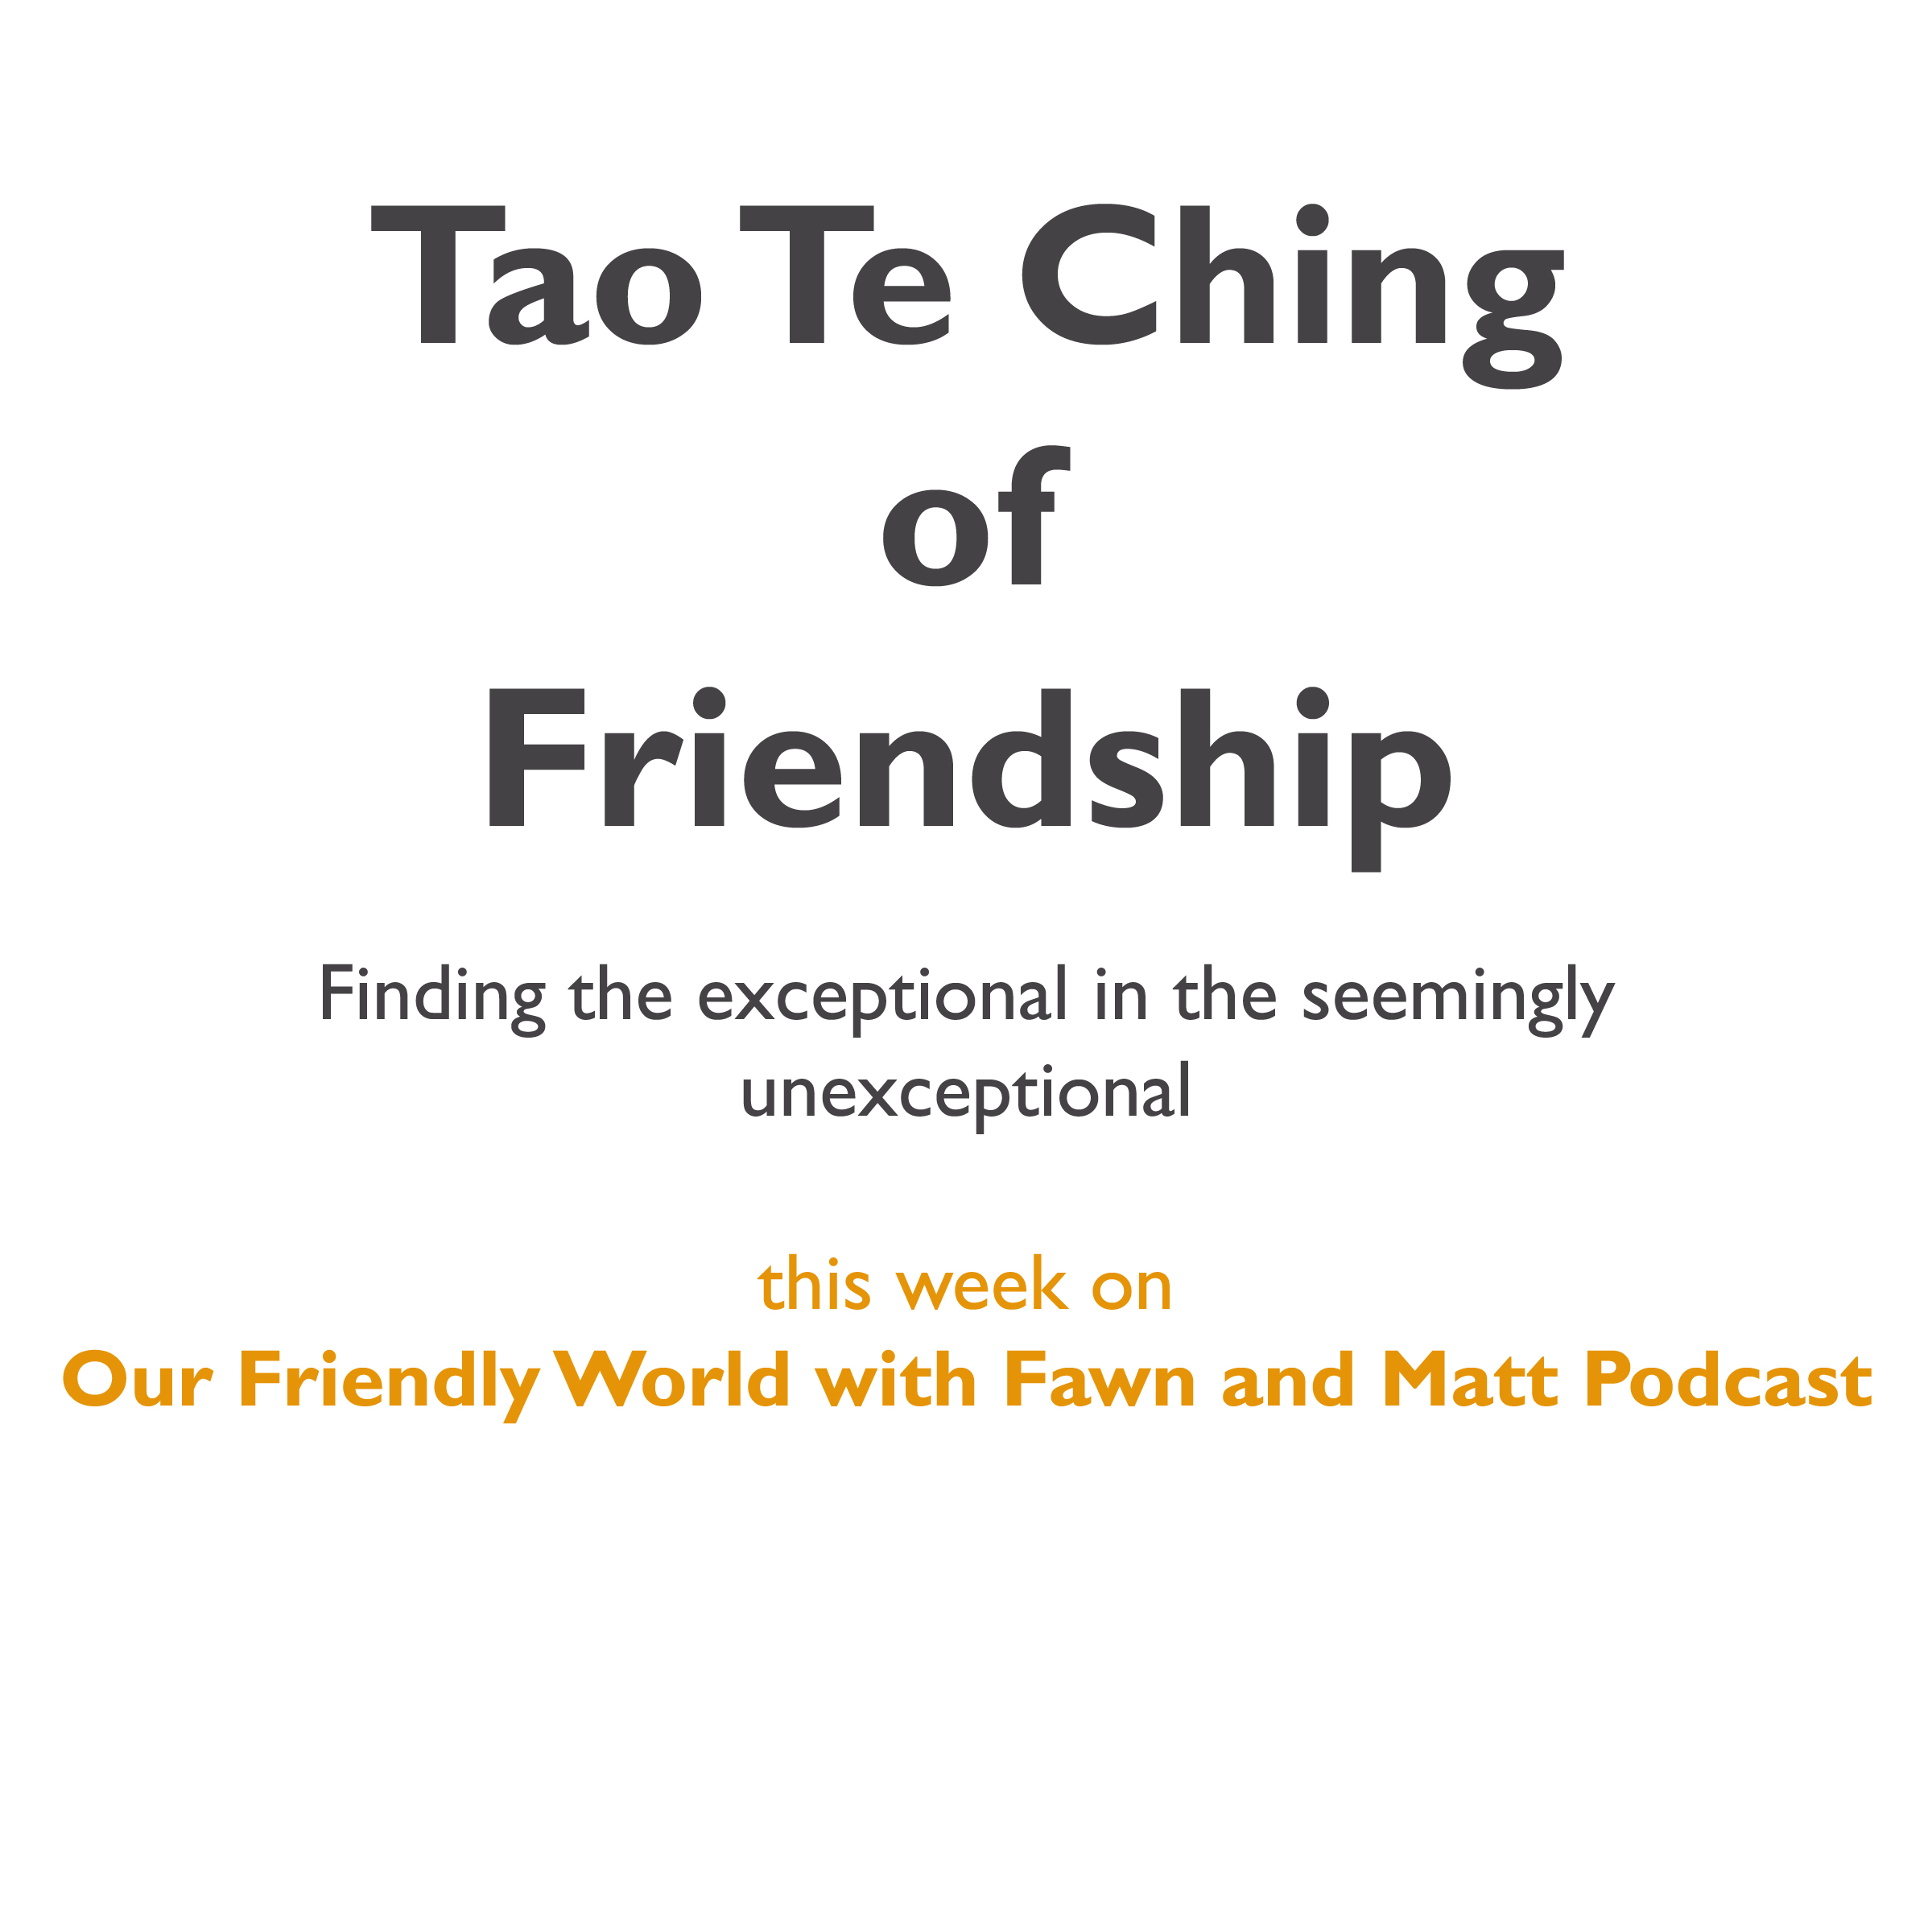 Tao Te Ching of Friendship  Finding the exceptional in the seemingly unexceptional